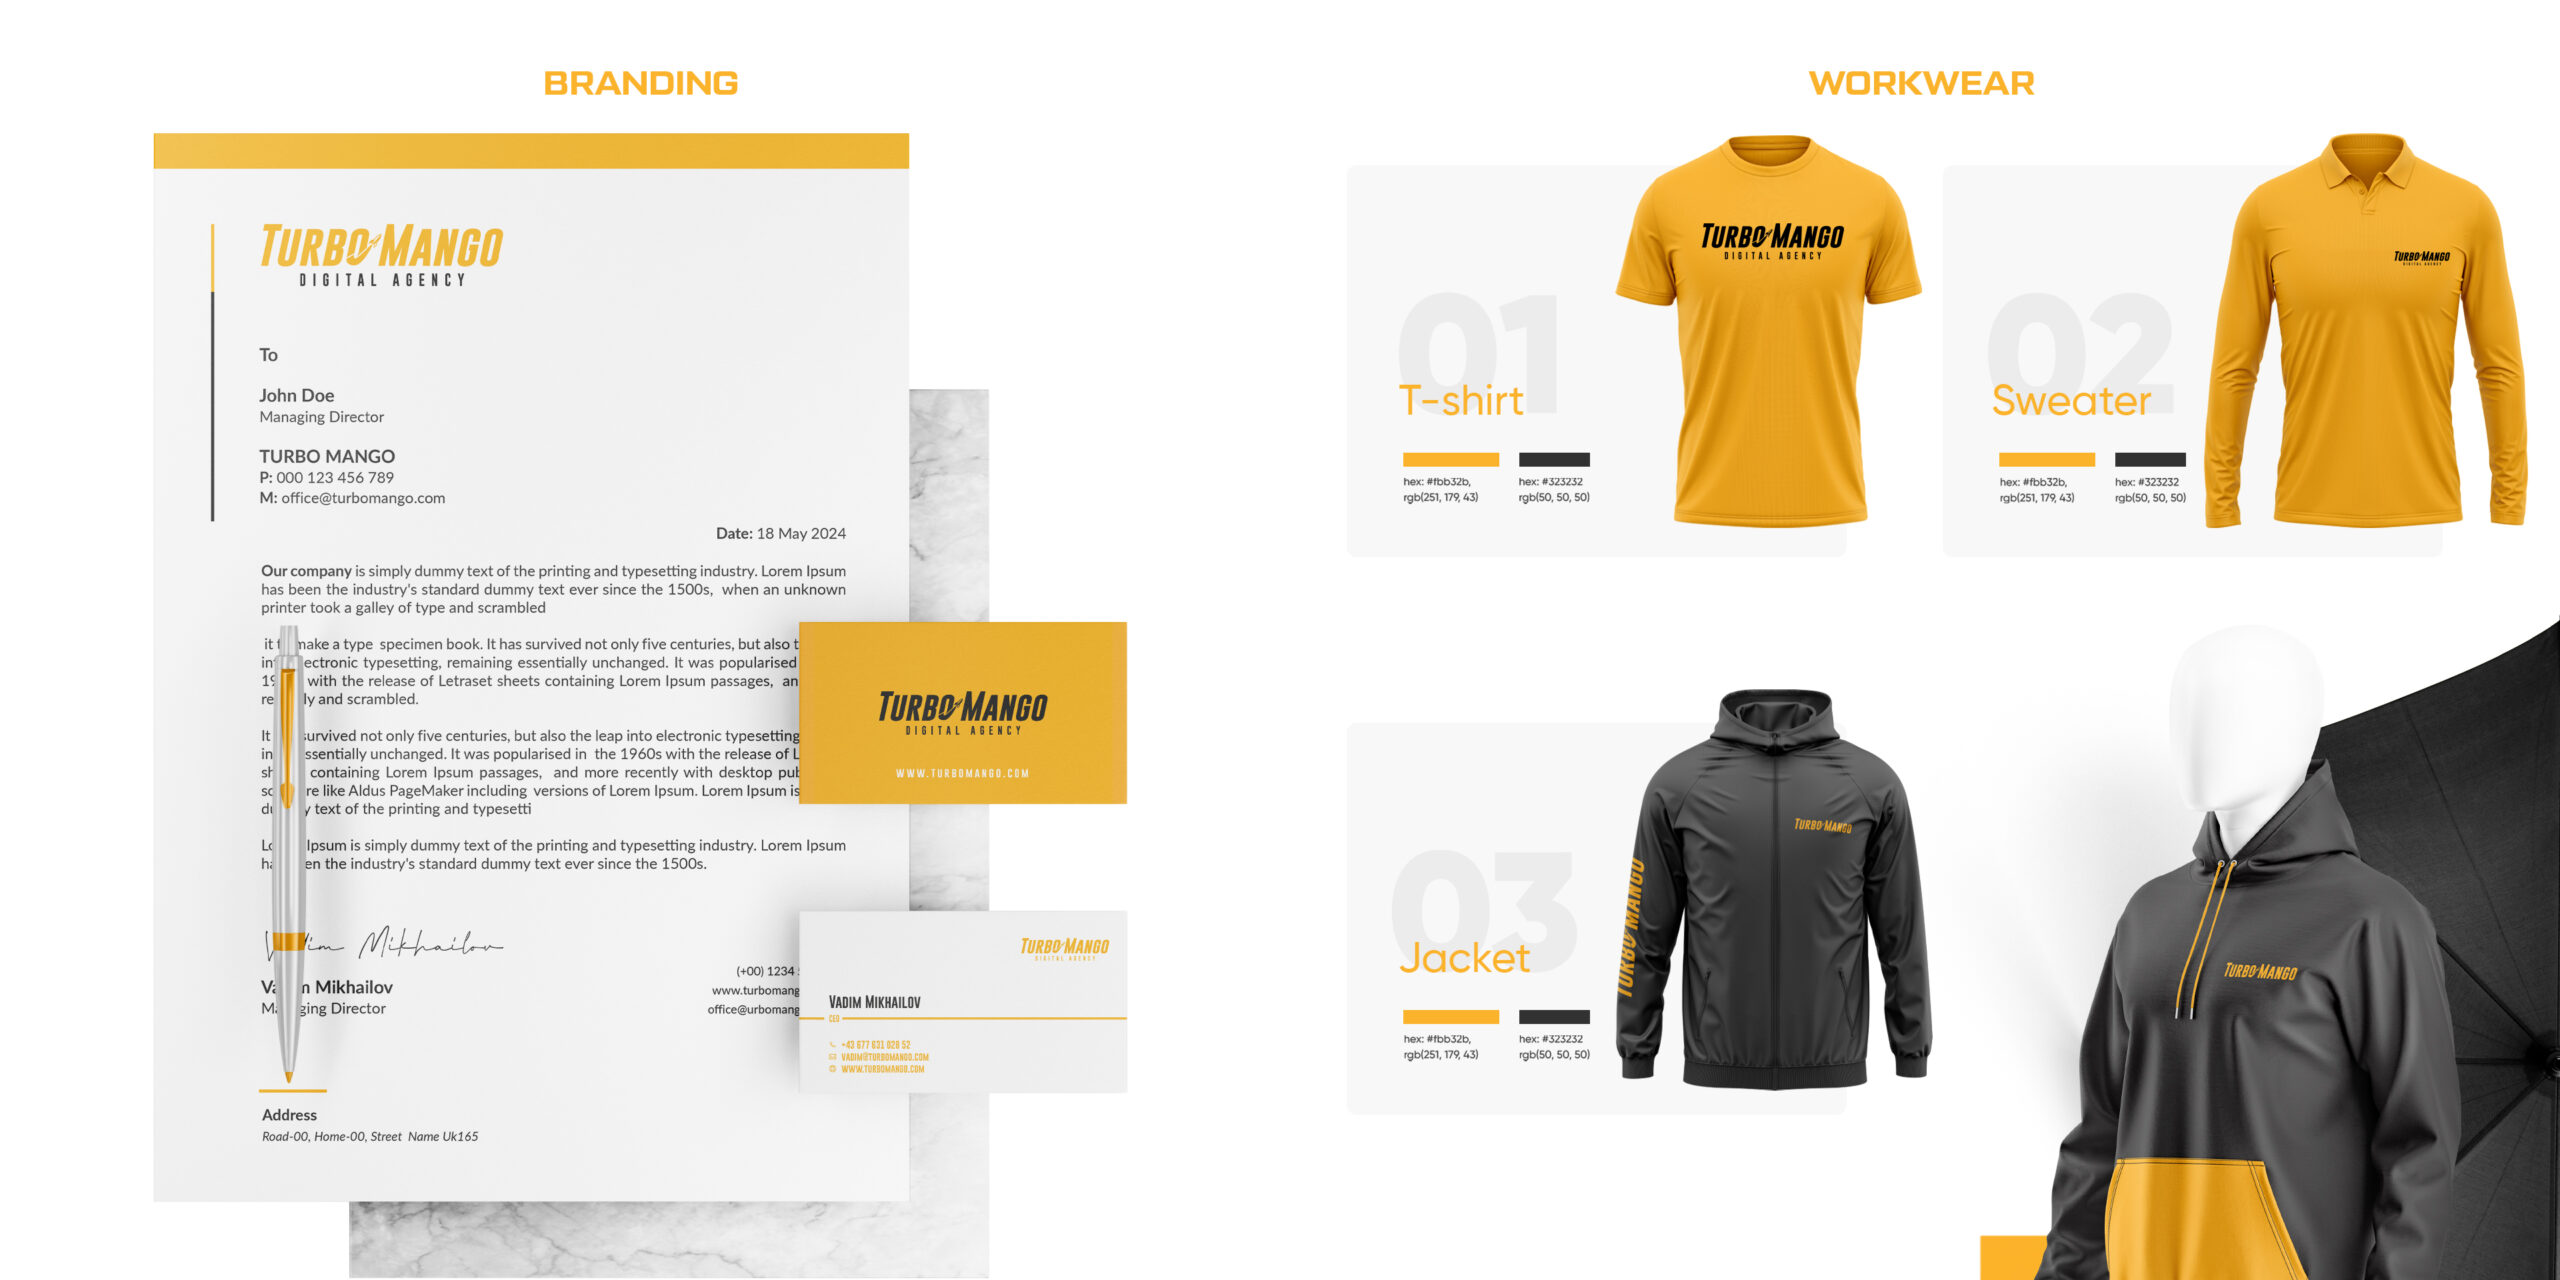 TurboMango Digital Agency branding including letterhead, business card, pen, and branded workwear items like T-shirt, sweater, and jacket.